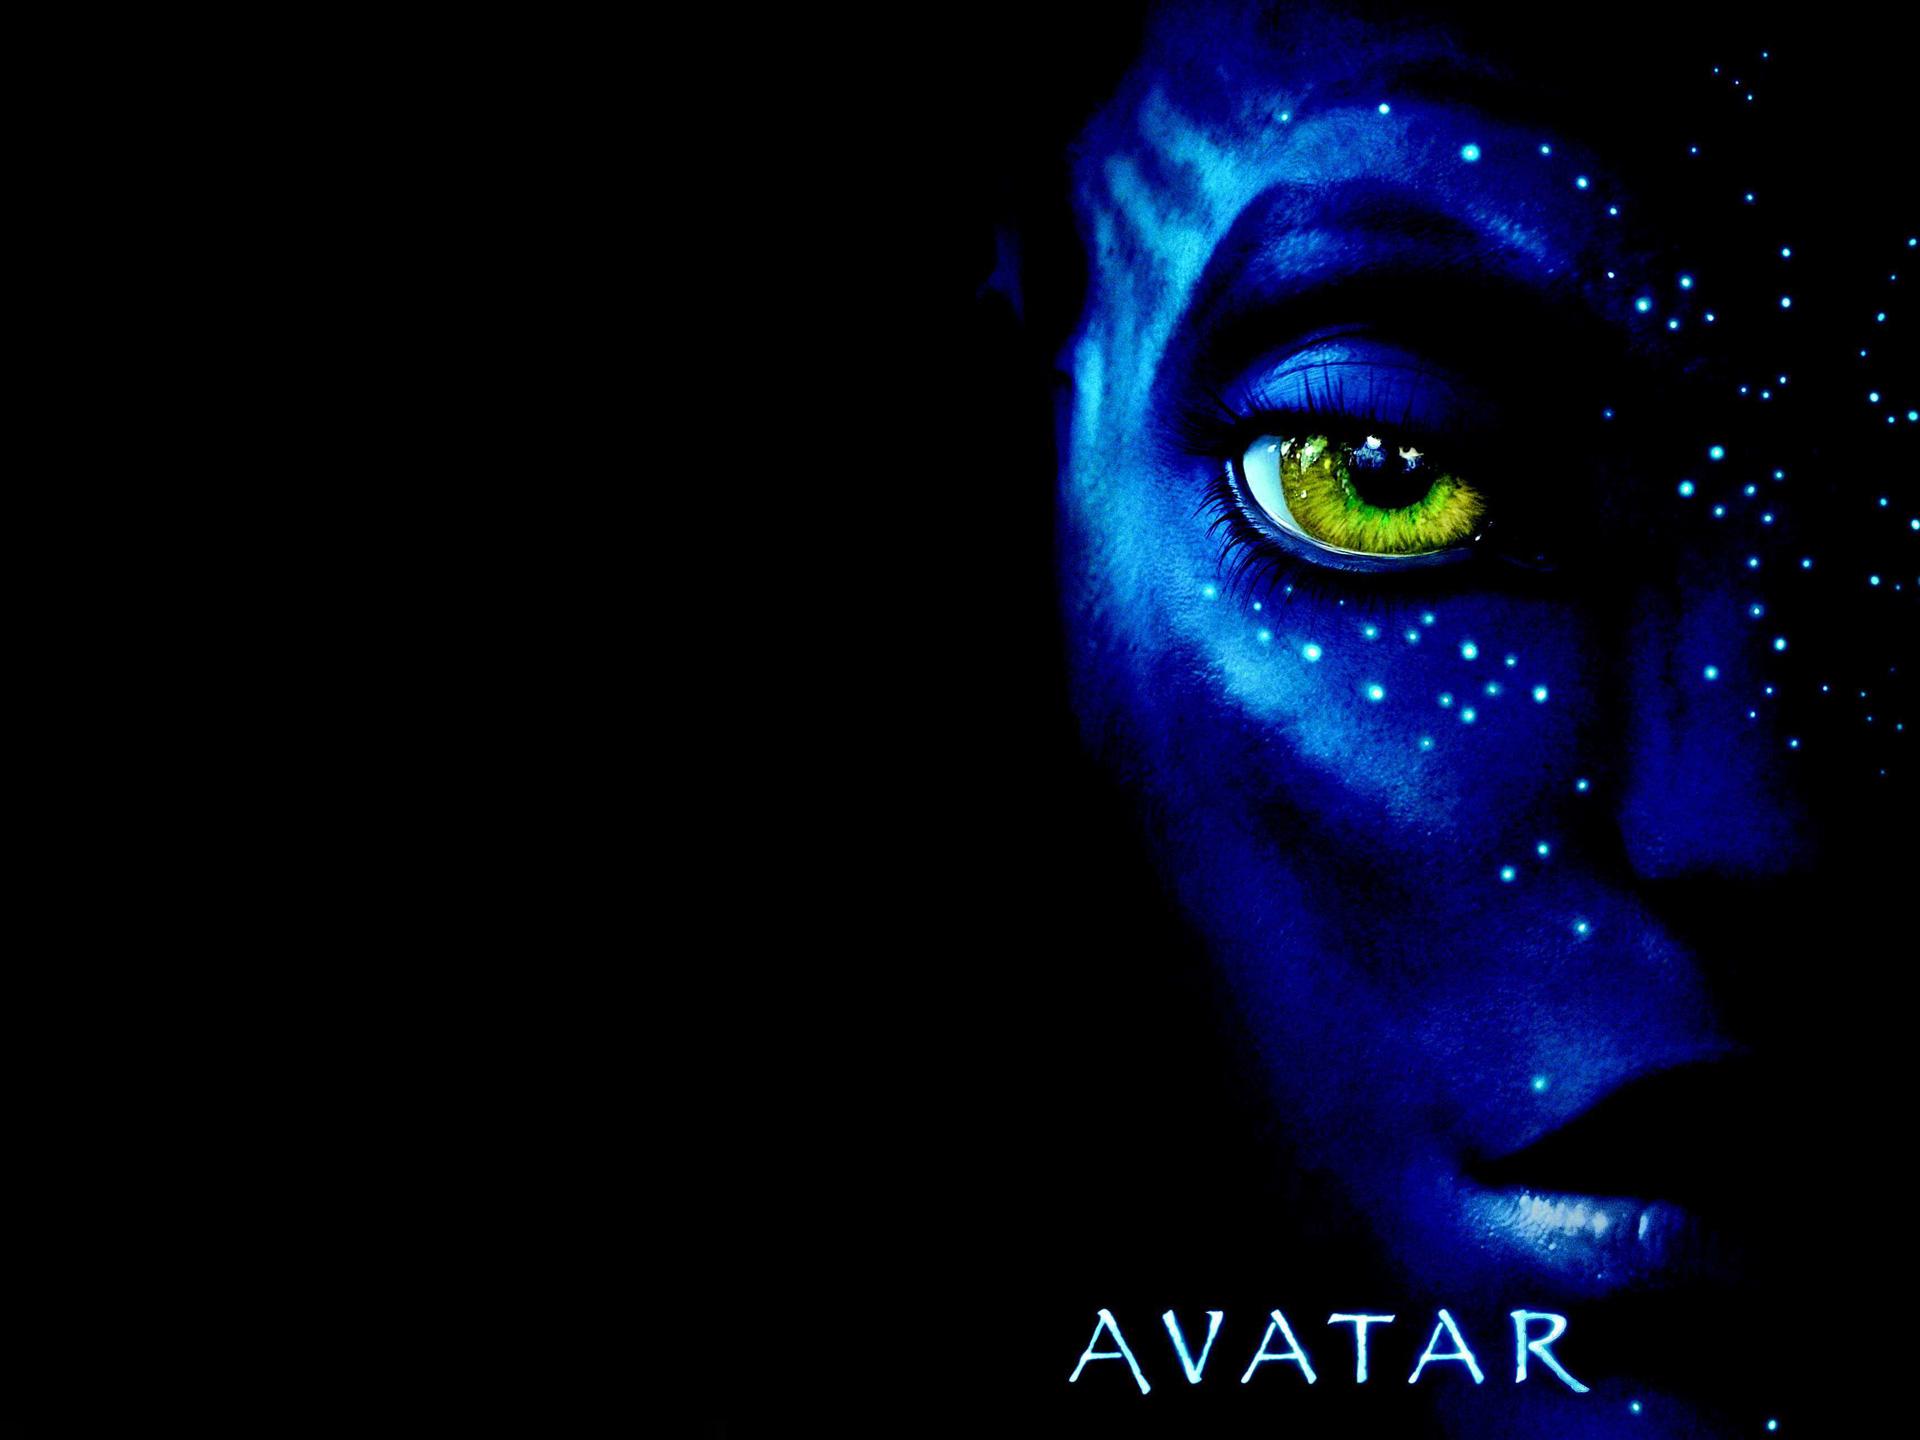 Official Avatar Movie Poster # 1920x1440